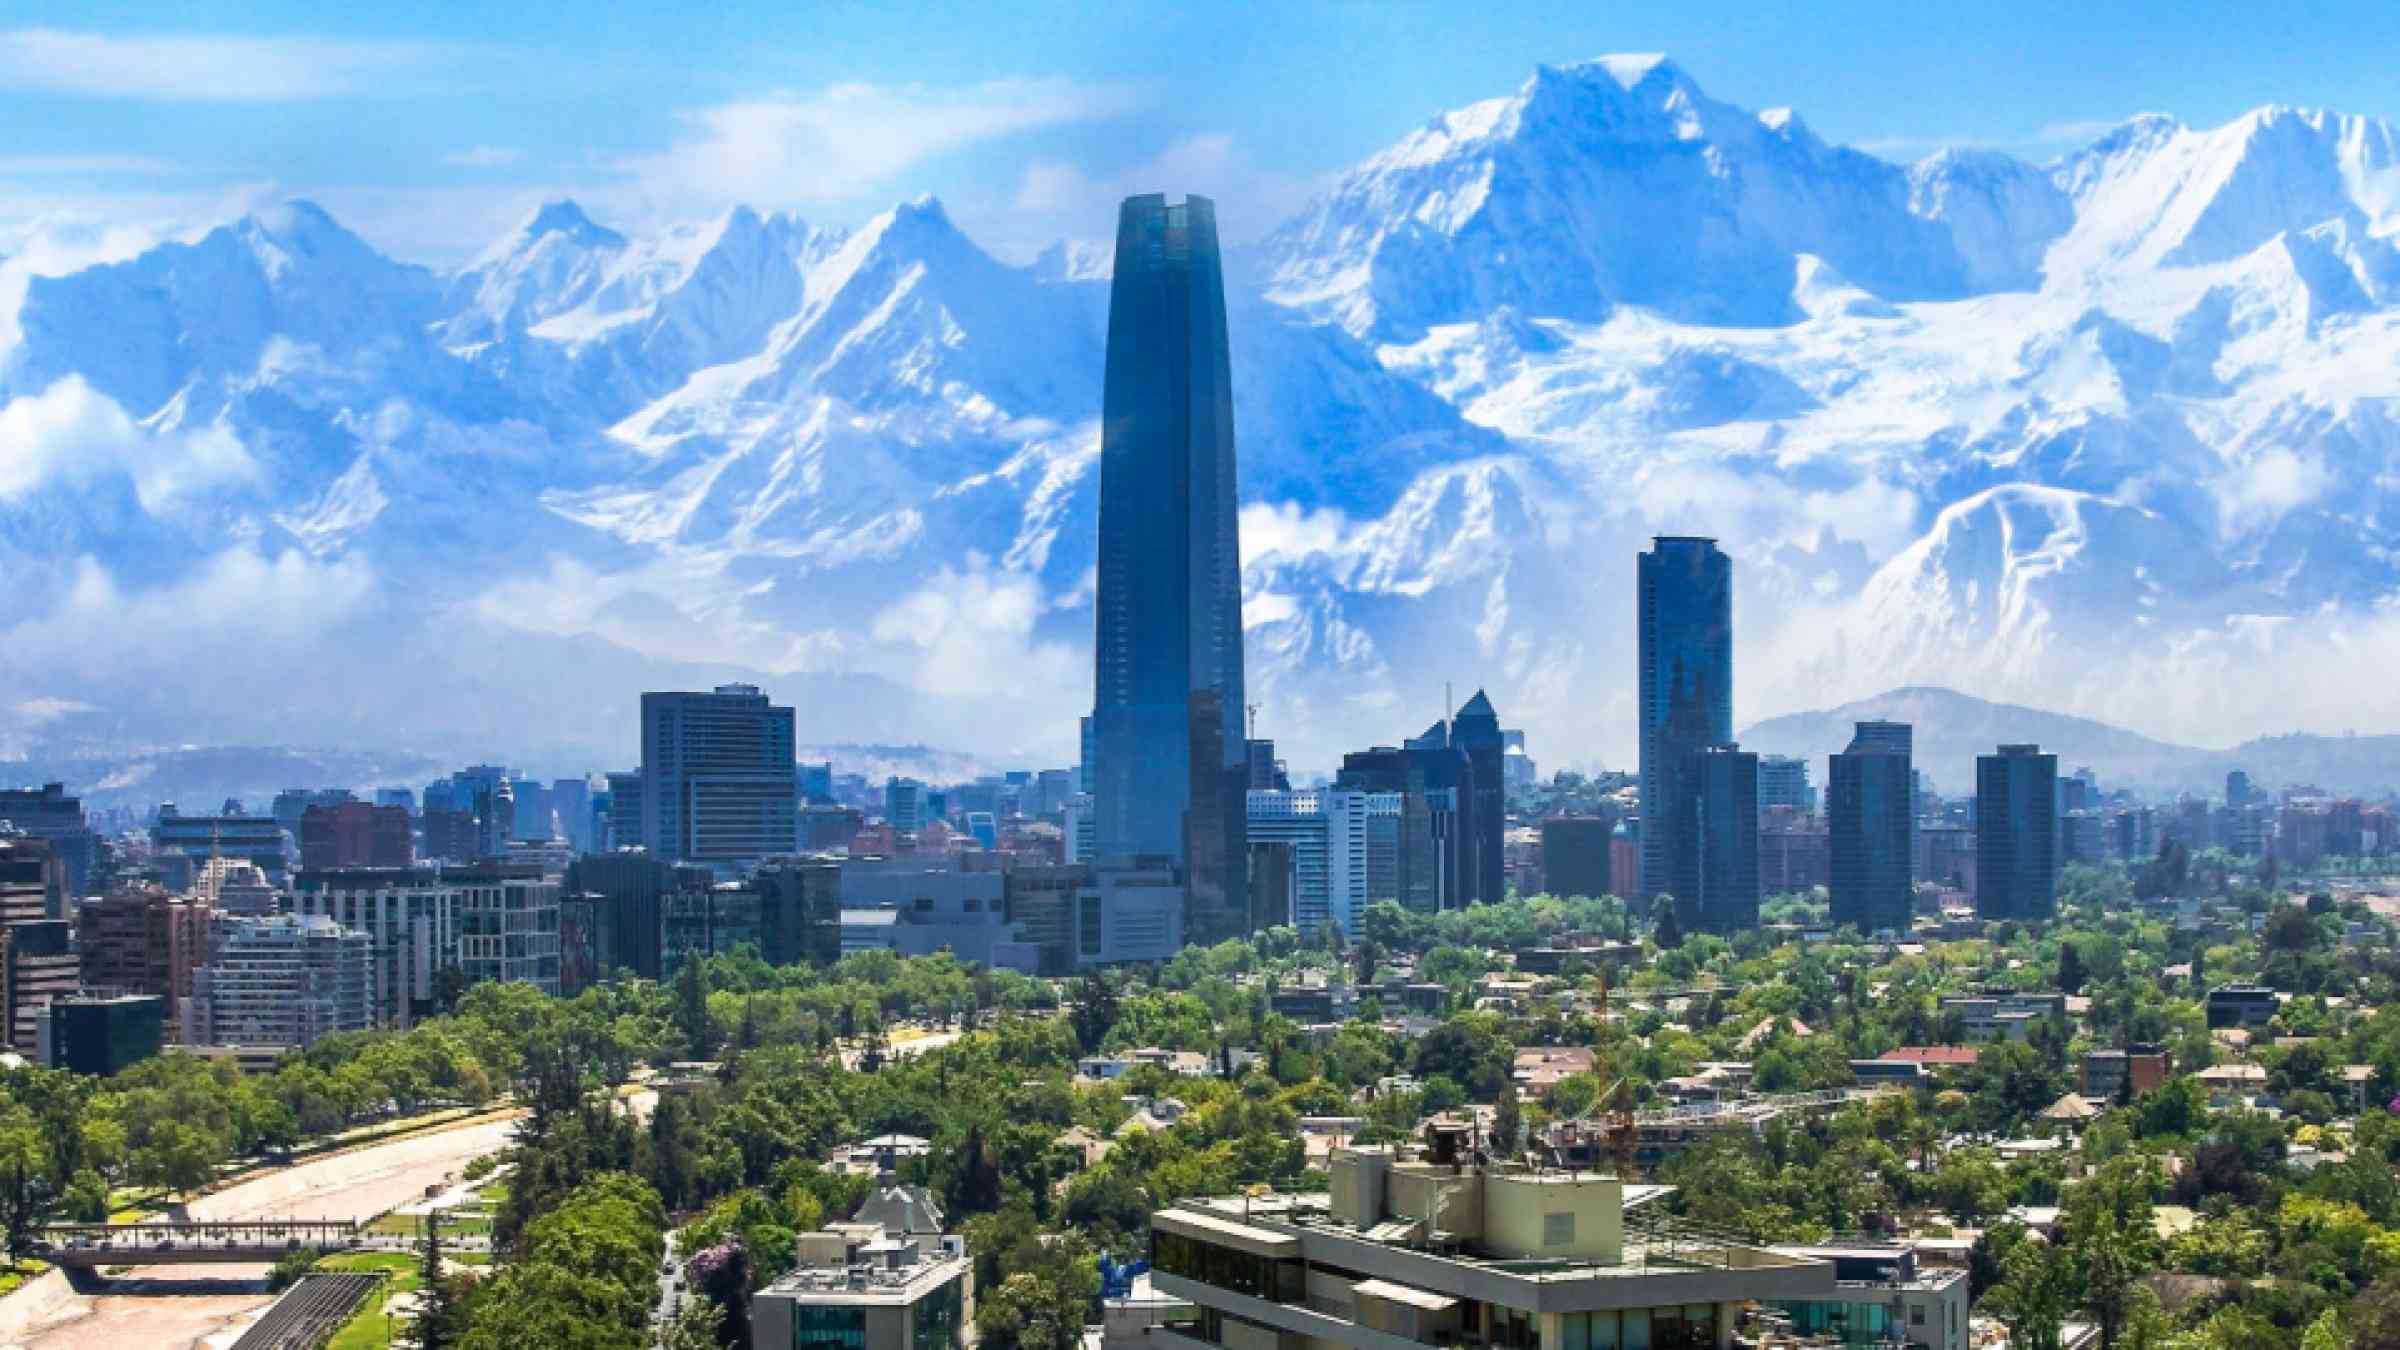 The city of Santiago in Chile, with the Andes in the background